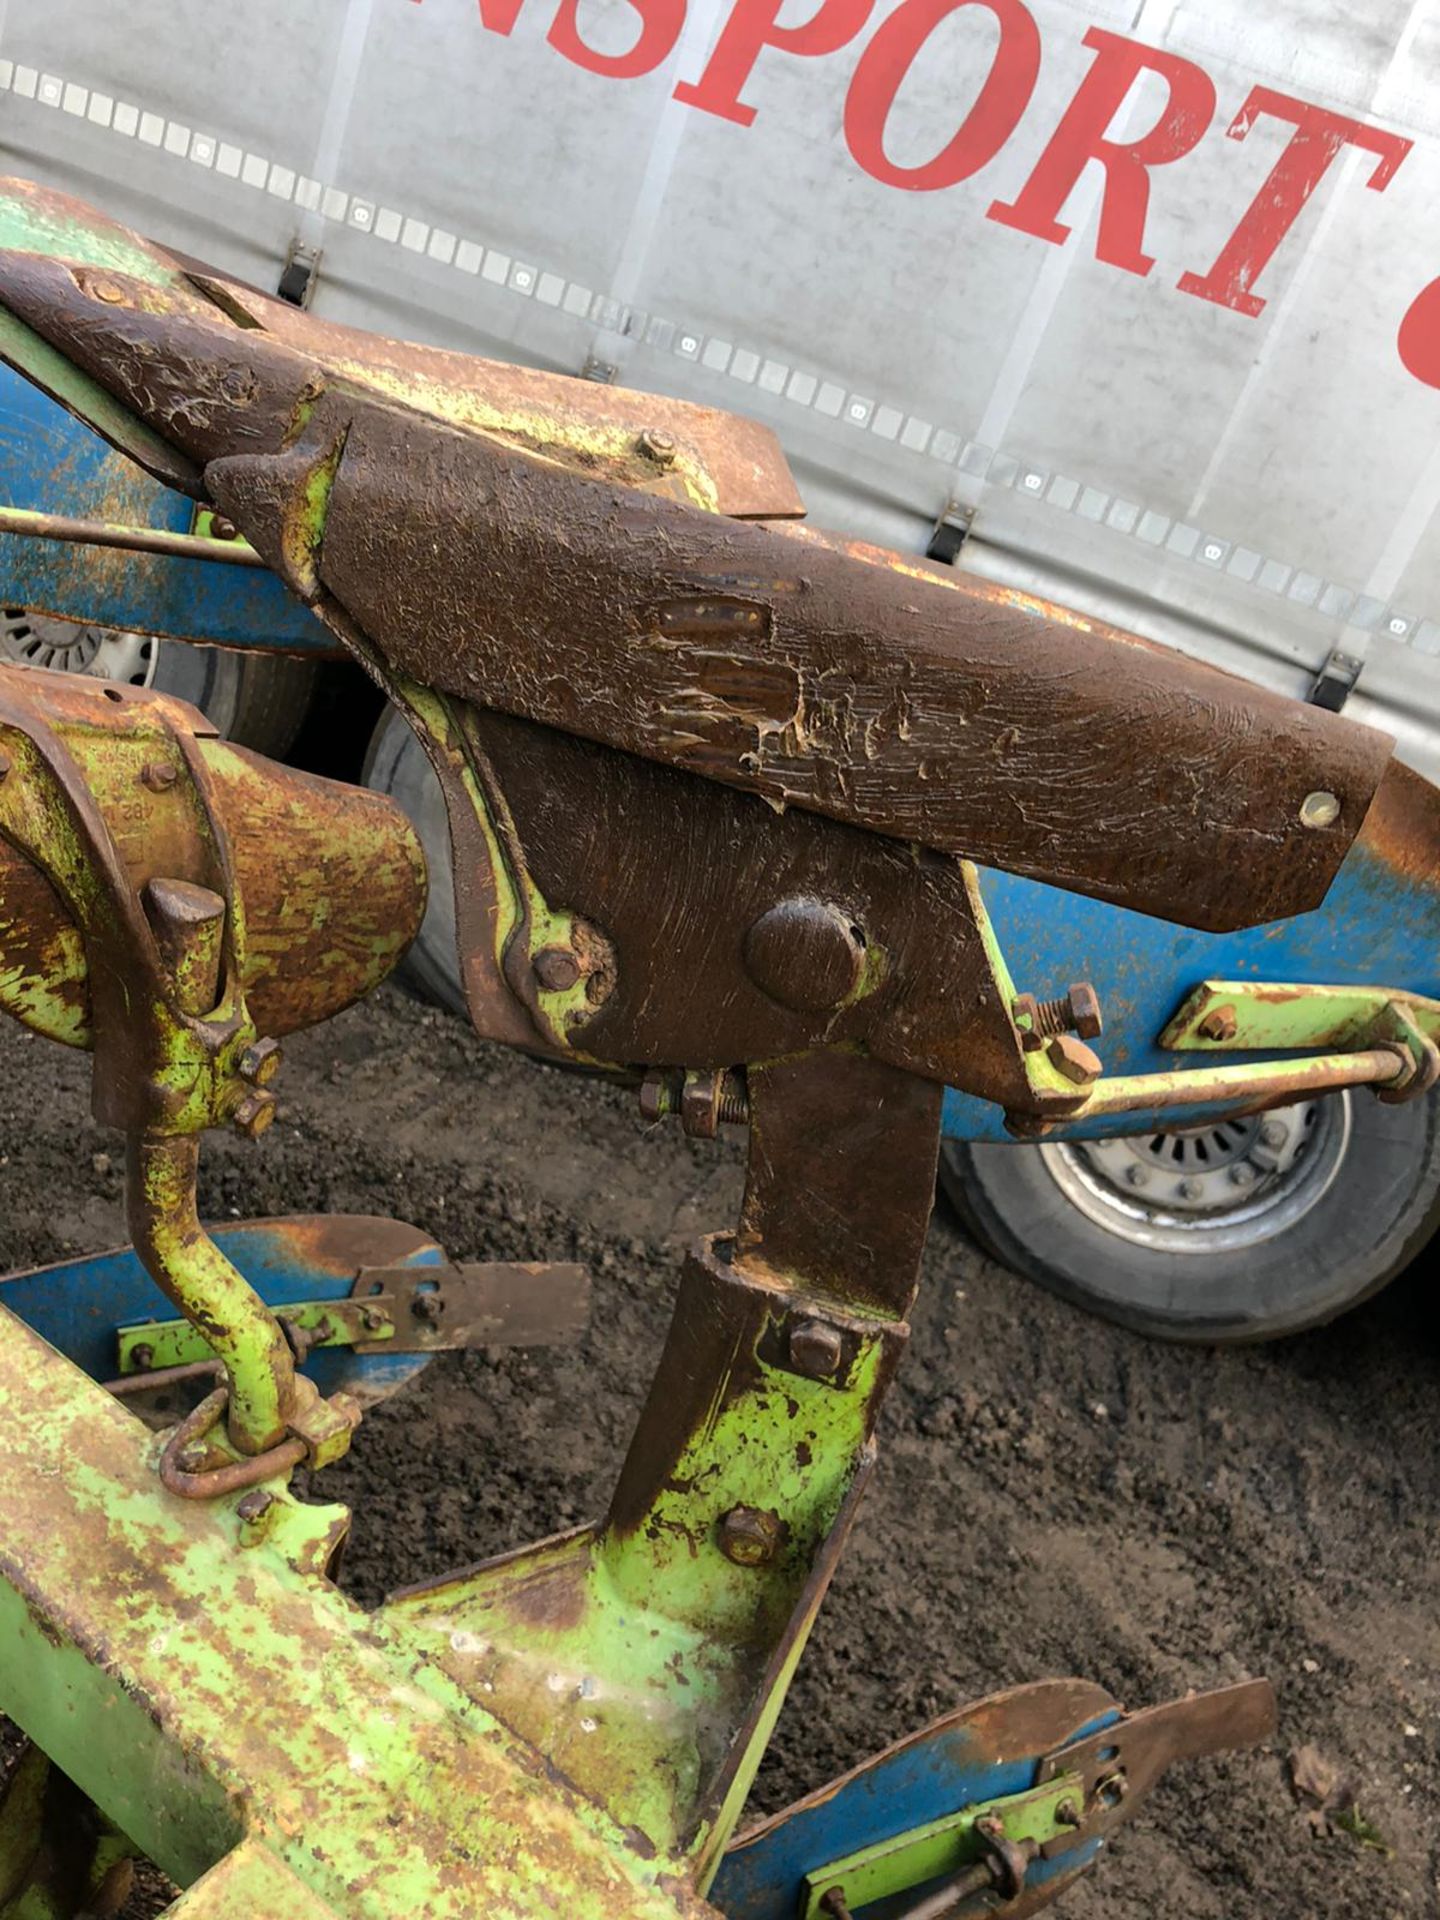 DOWDESWELL DP8B 4 FURROW PLOUGH IN GOOD CONDITION, NO WELD *PLUS VAT* - Image 5 of 8